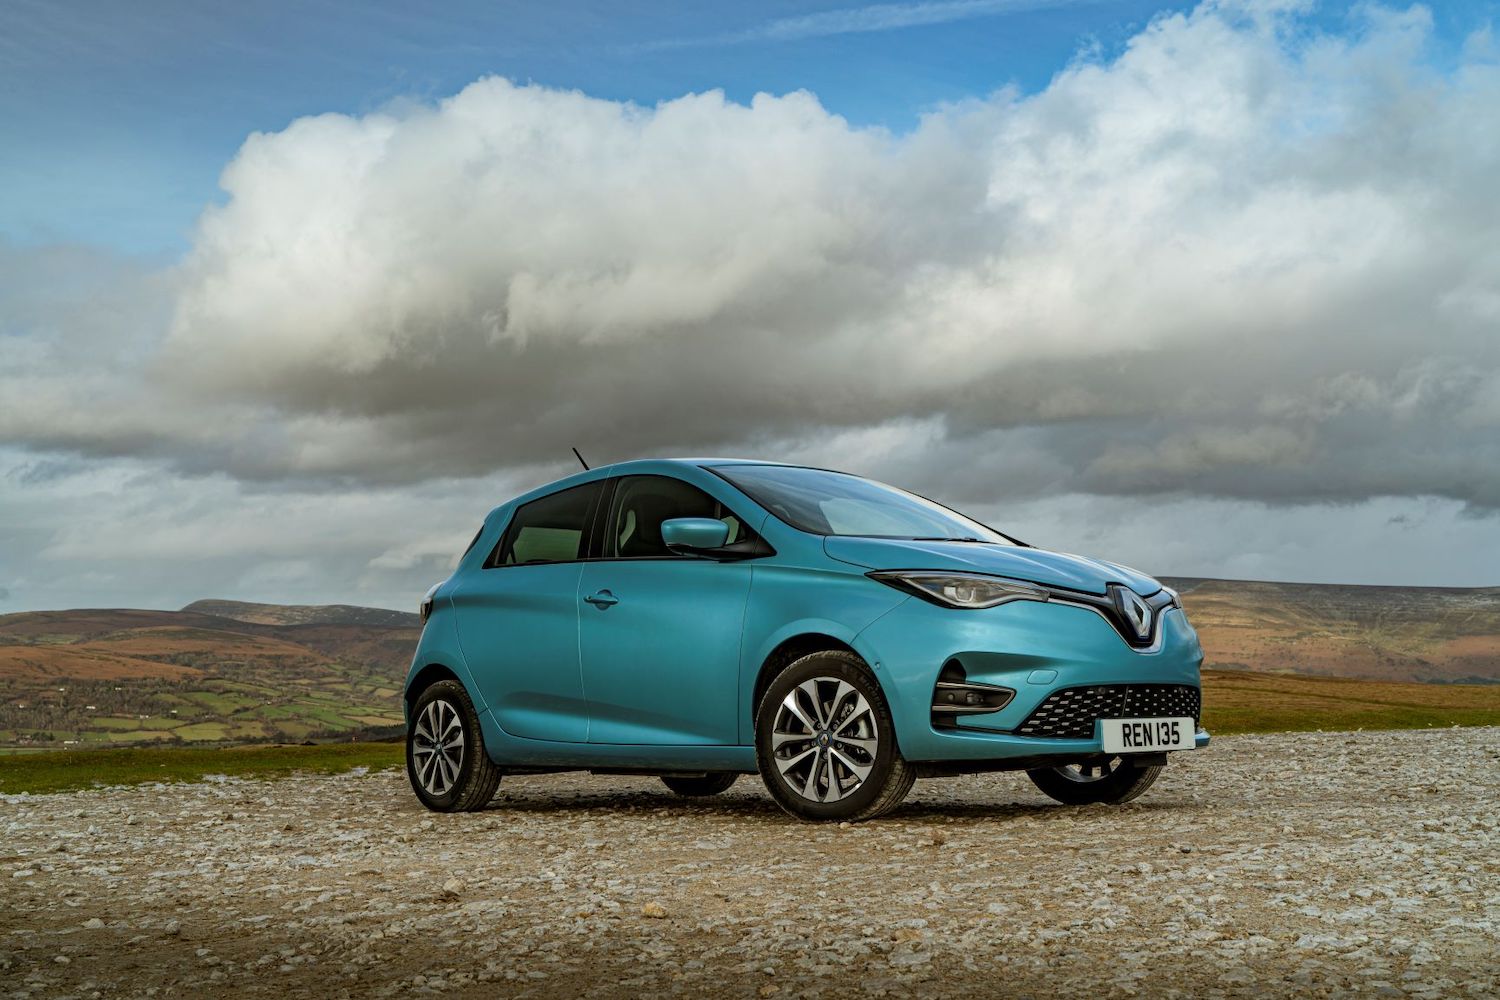 Lower mileage? Renault will trim your PCP payment